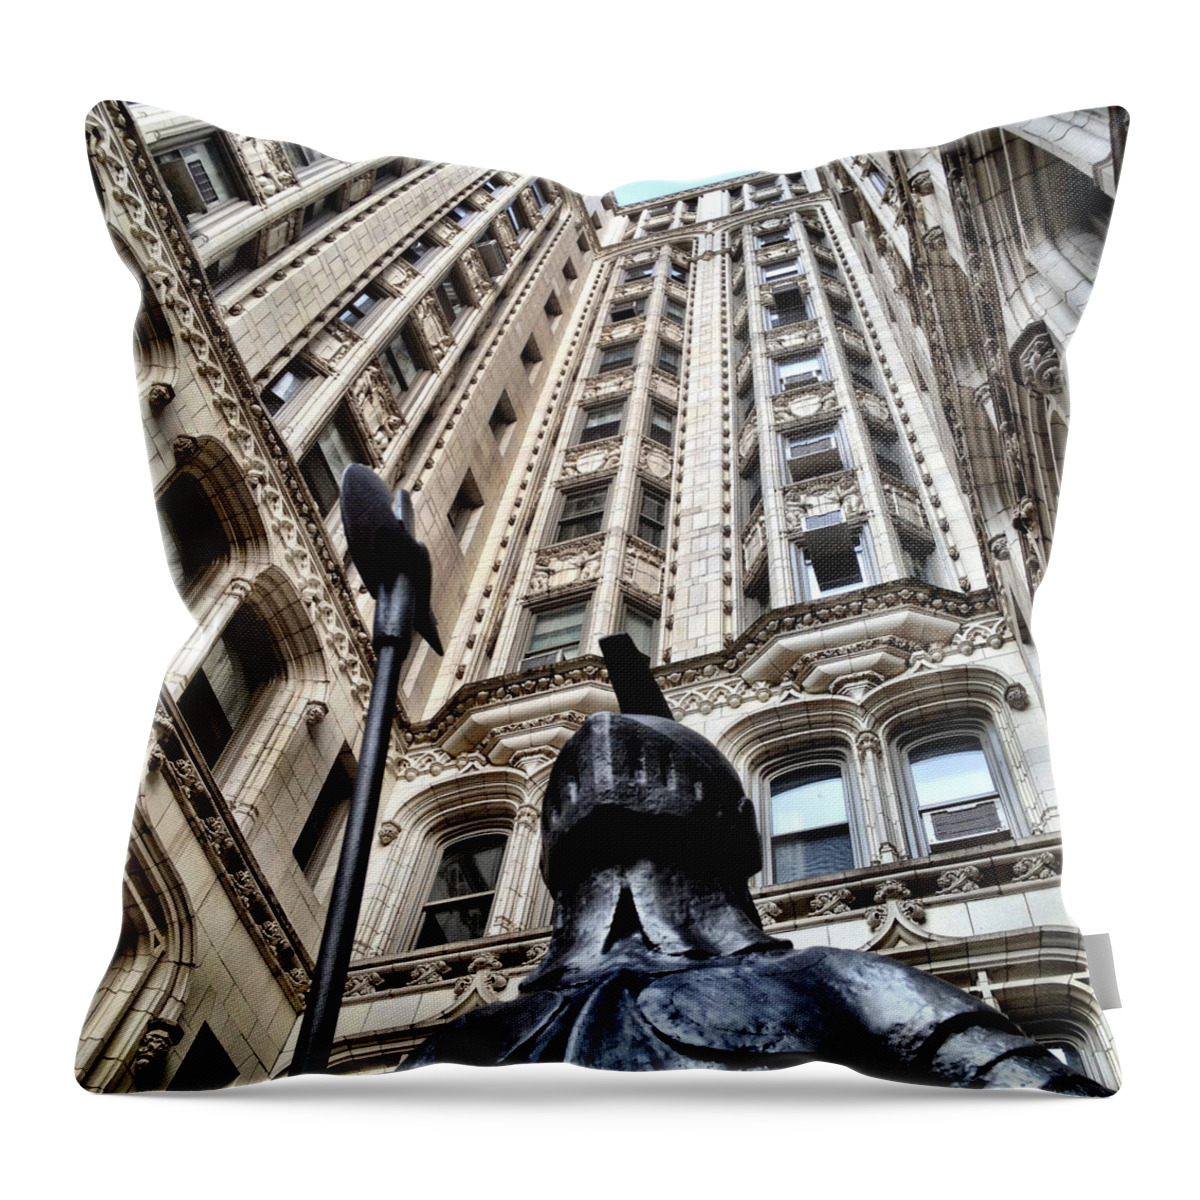 Gramercy Park Throw Pillow featuring the photograph Gothic Gramercy #2 by Natasha Marco